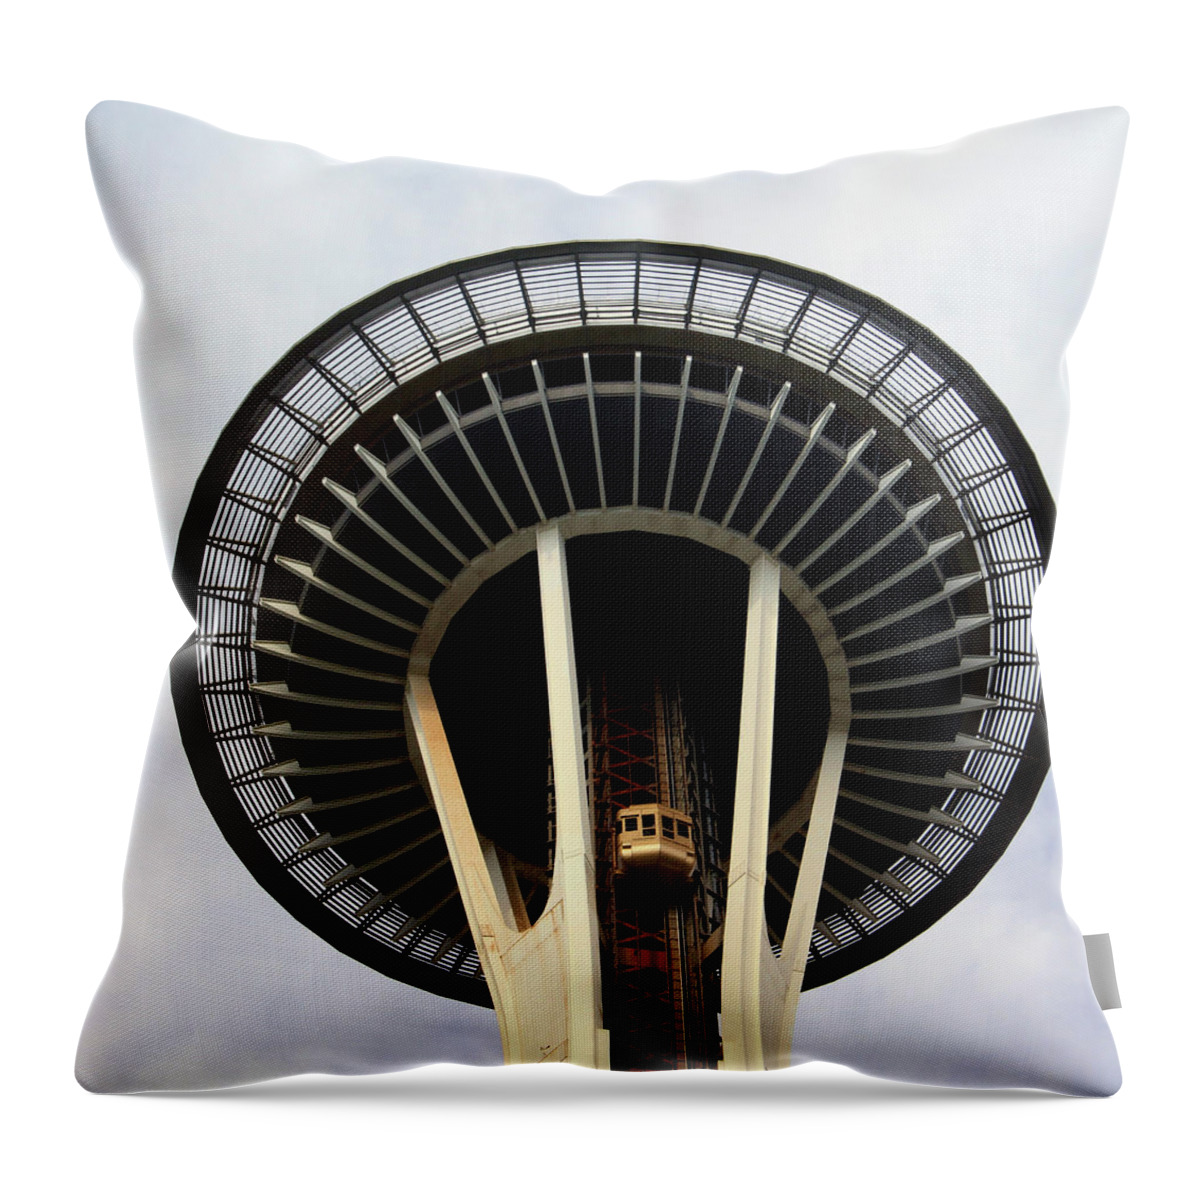 Space Needle Throw Pillow featuring the photograph Space Needle- by Linda Woods by Linda Woods